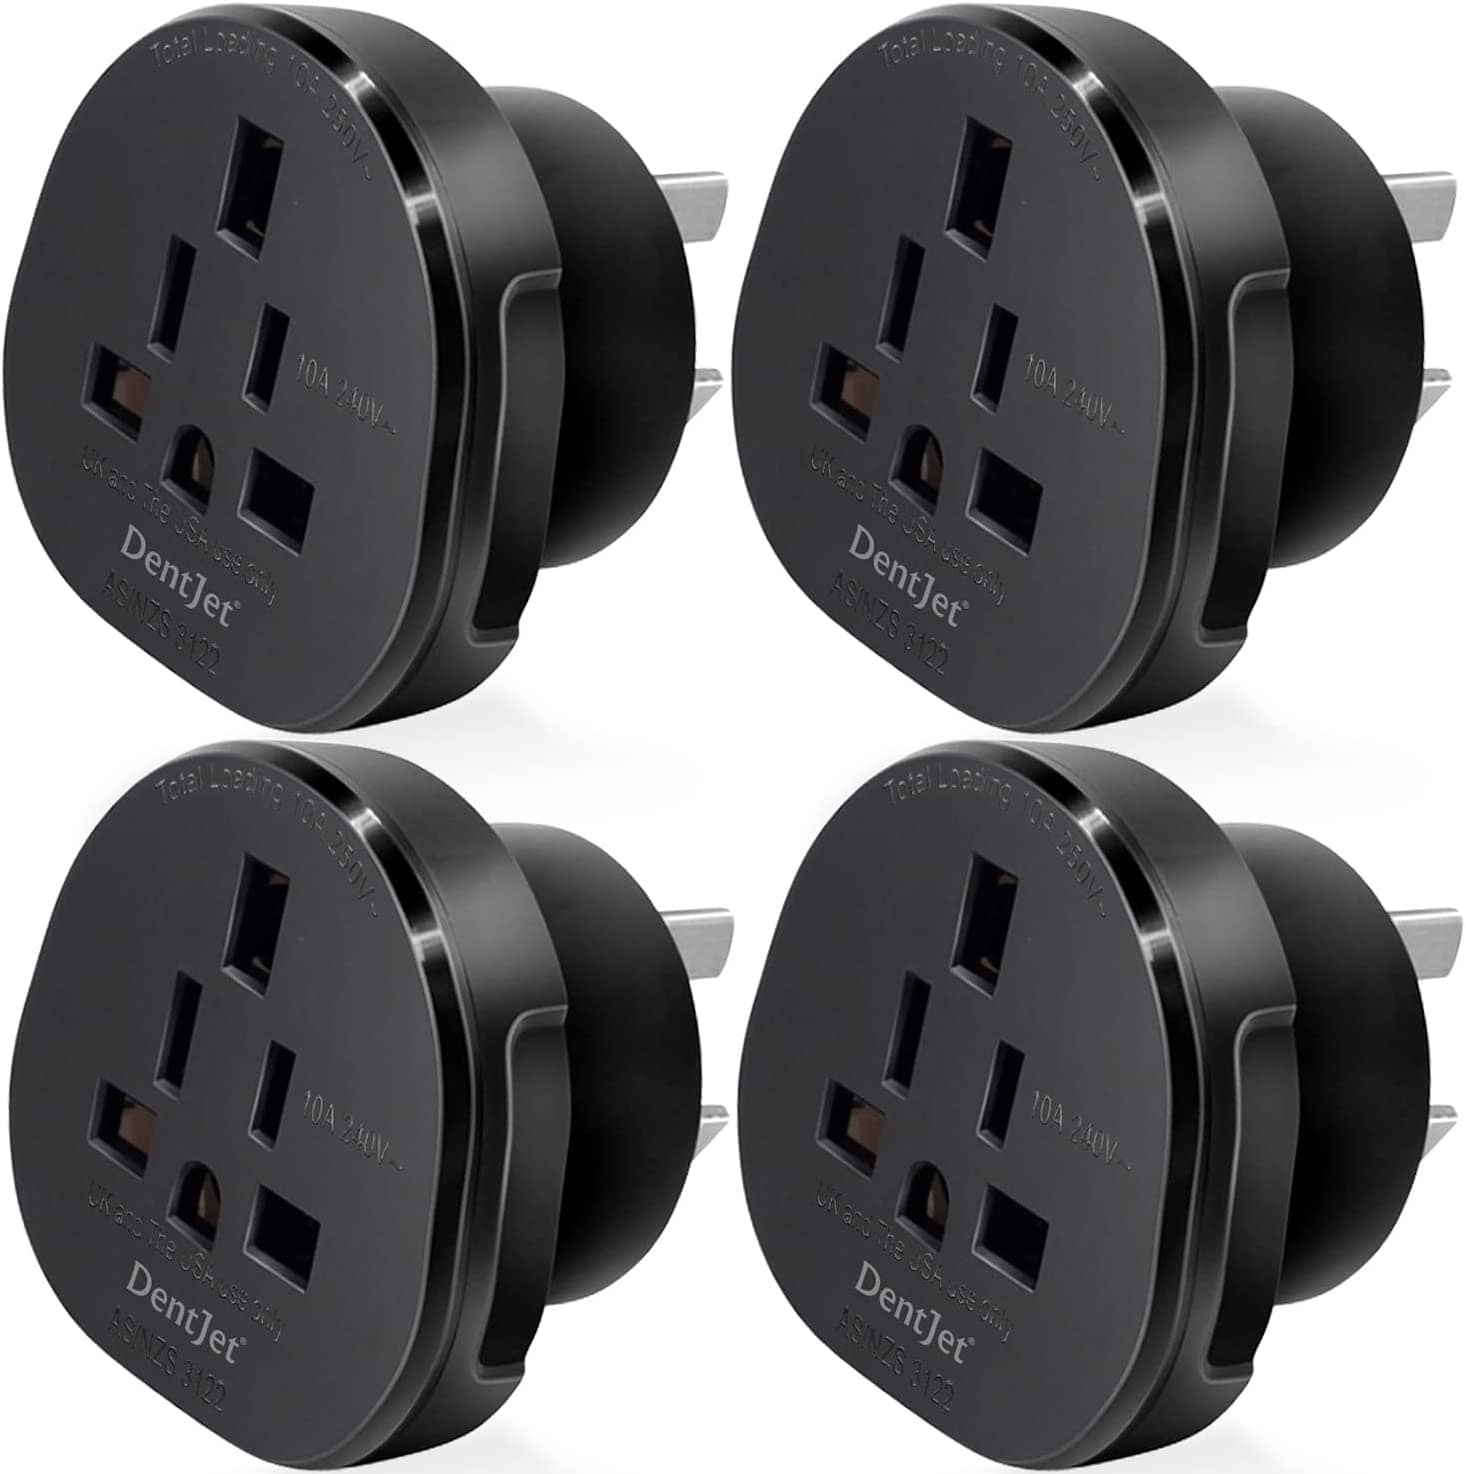 SmartTechShopping charger socket 4 * SAA UKUS-AU Travel Adapter for Australia/New Zealand with Safety Shutter and Insulated Pins